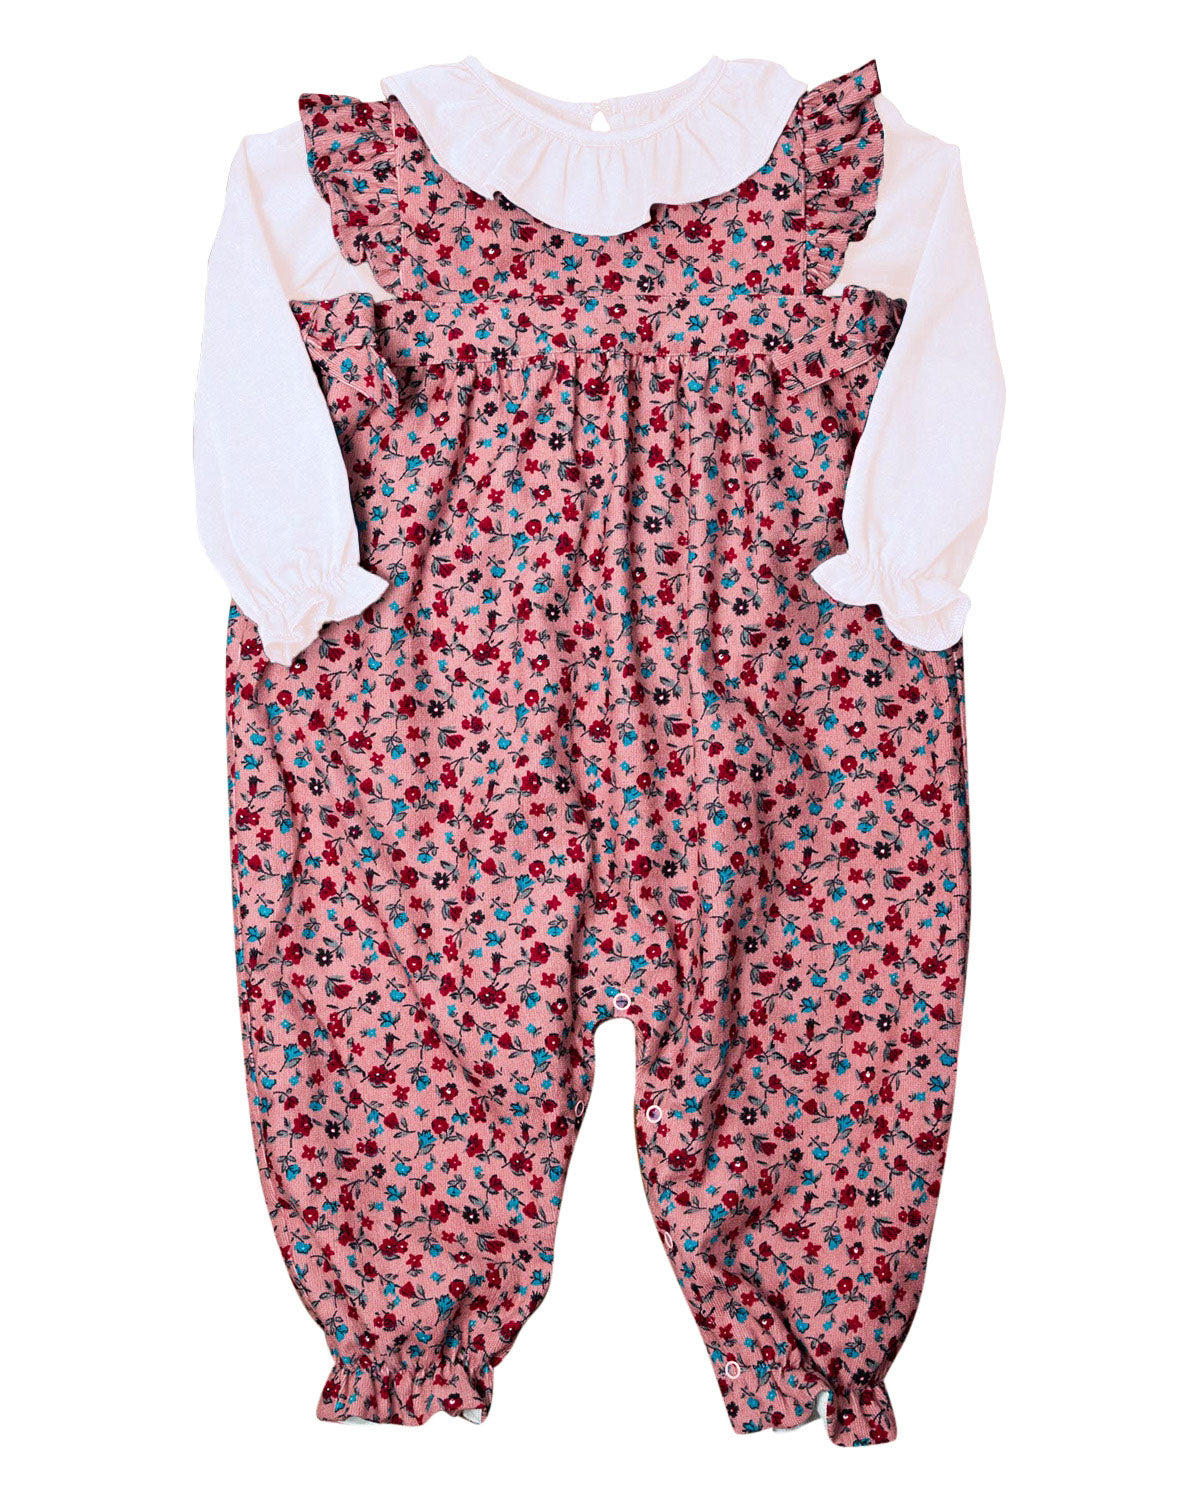 Ditsy Floral Corduroy Romper with White Knit Shirt Set